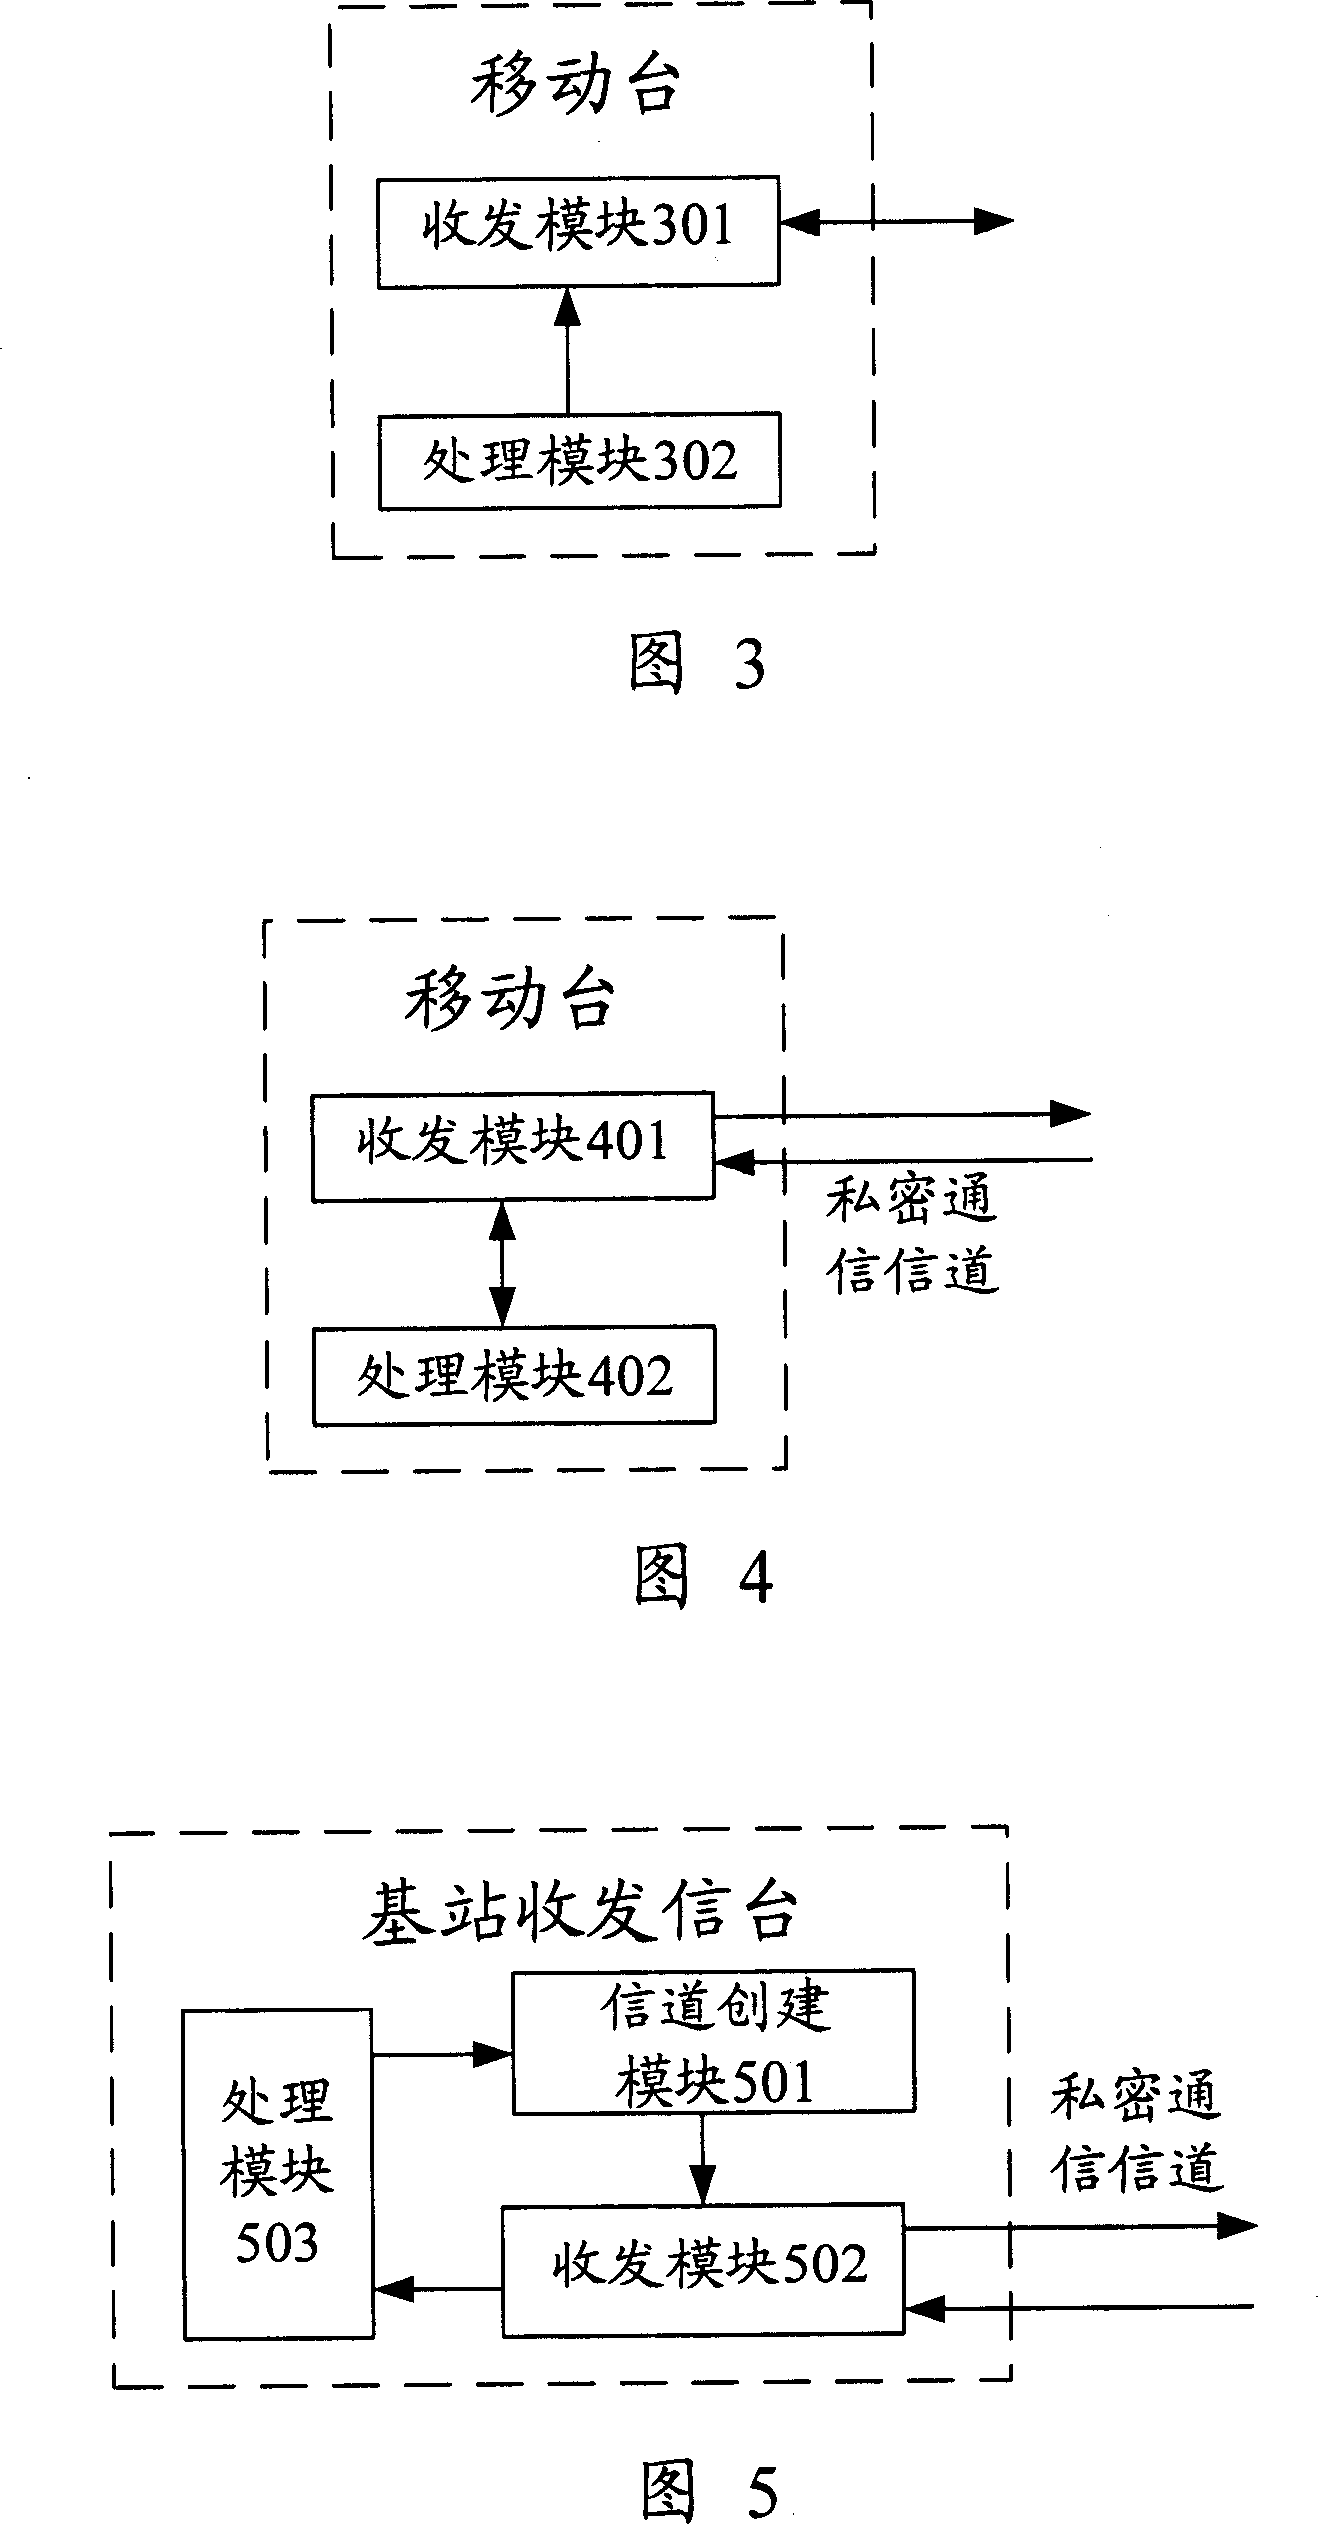 Method and apparatus for performing secret communication in cluster group call